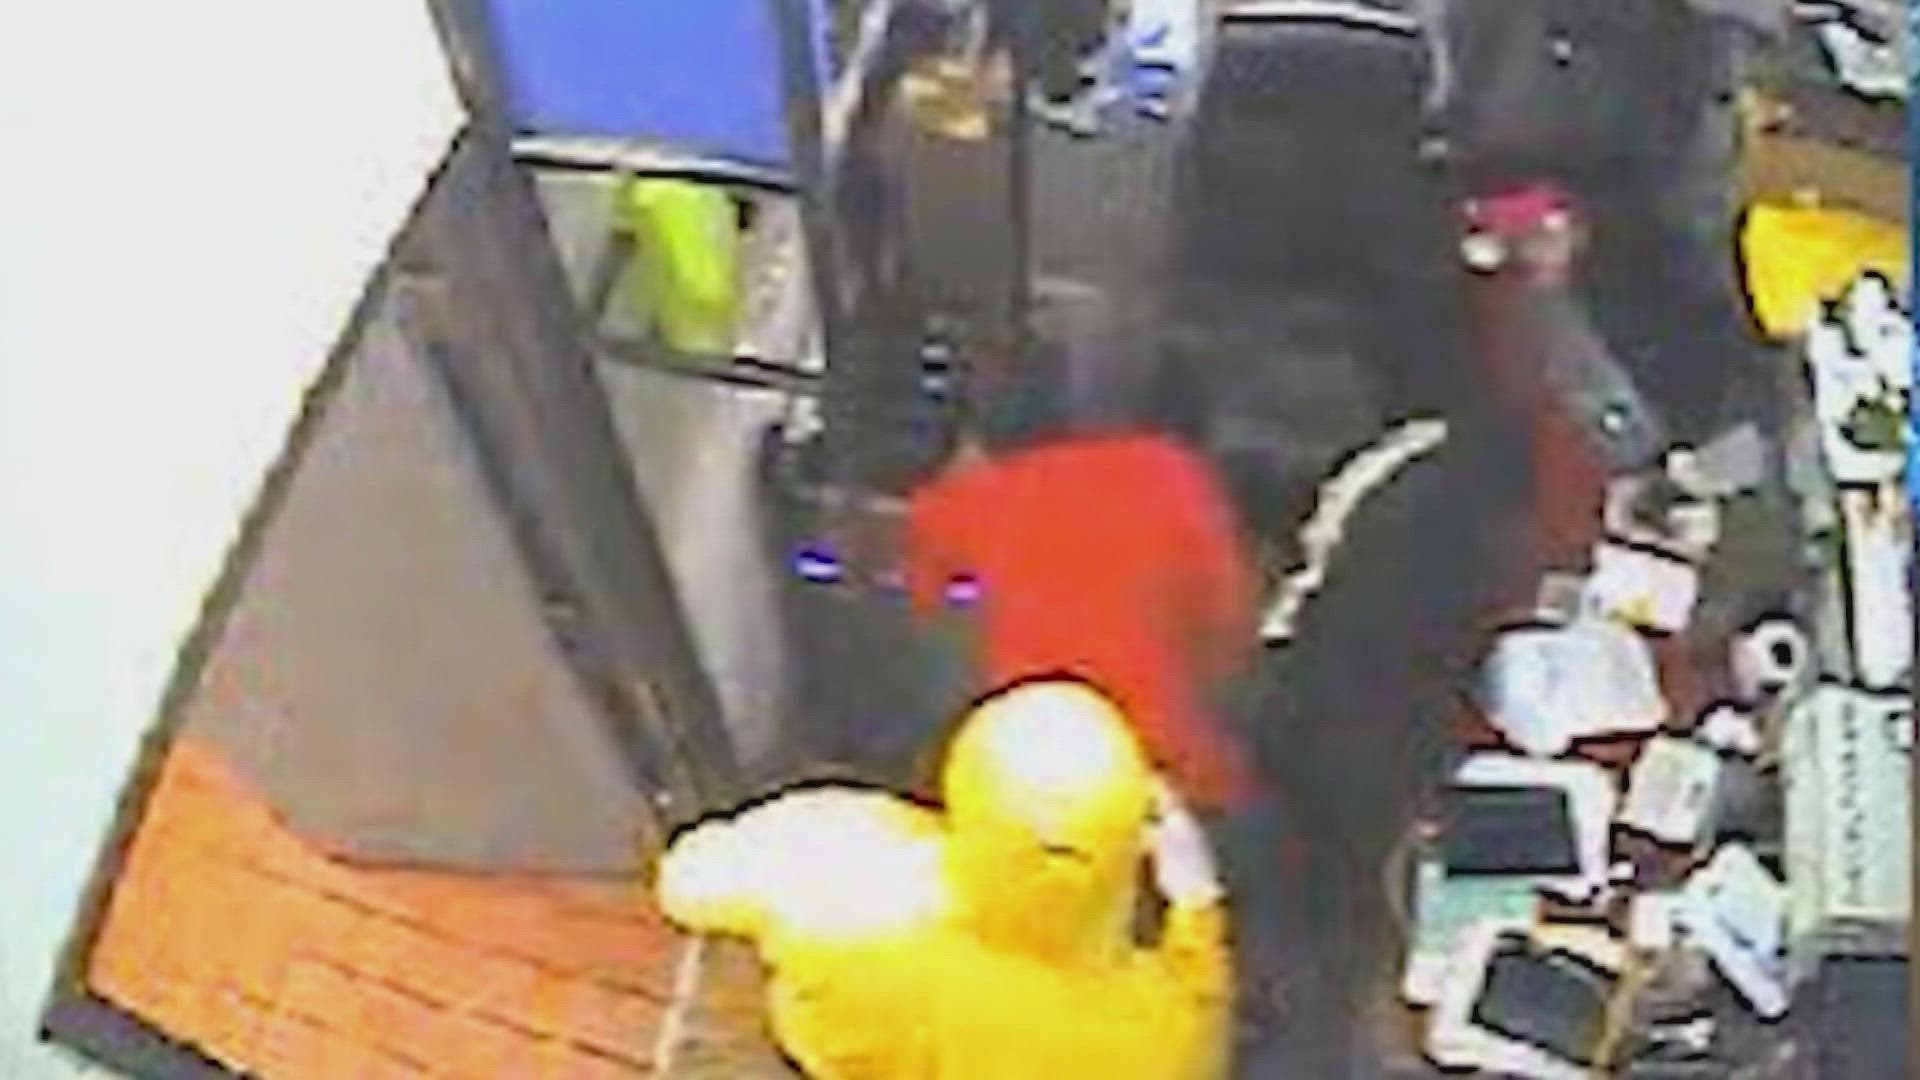 Police in Dallas say about $22,000 in total was stolen from two Pollo Regio locations in the city. The Colony PD also reported a break-in at another location.